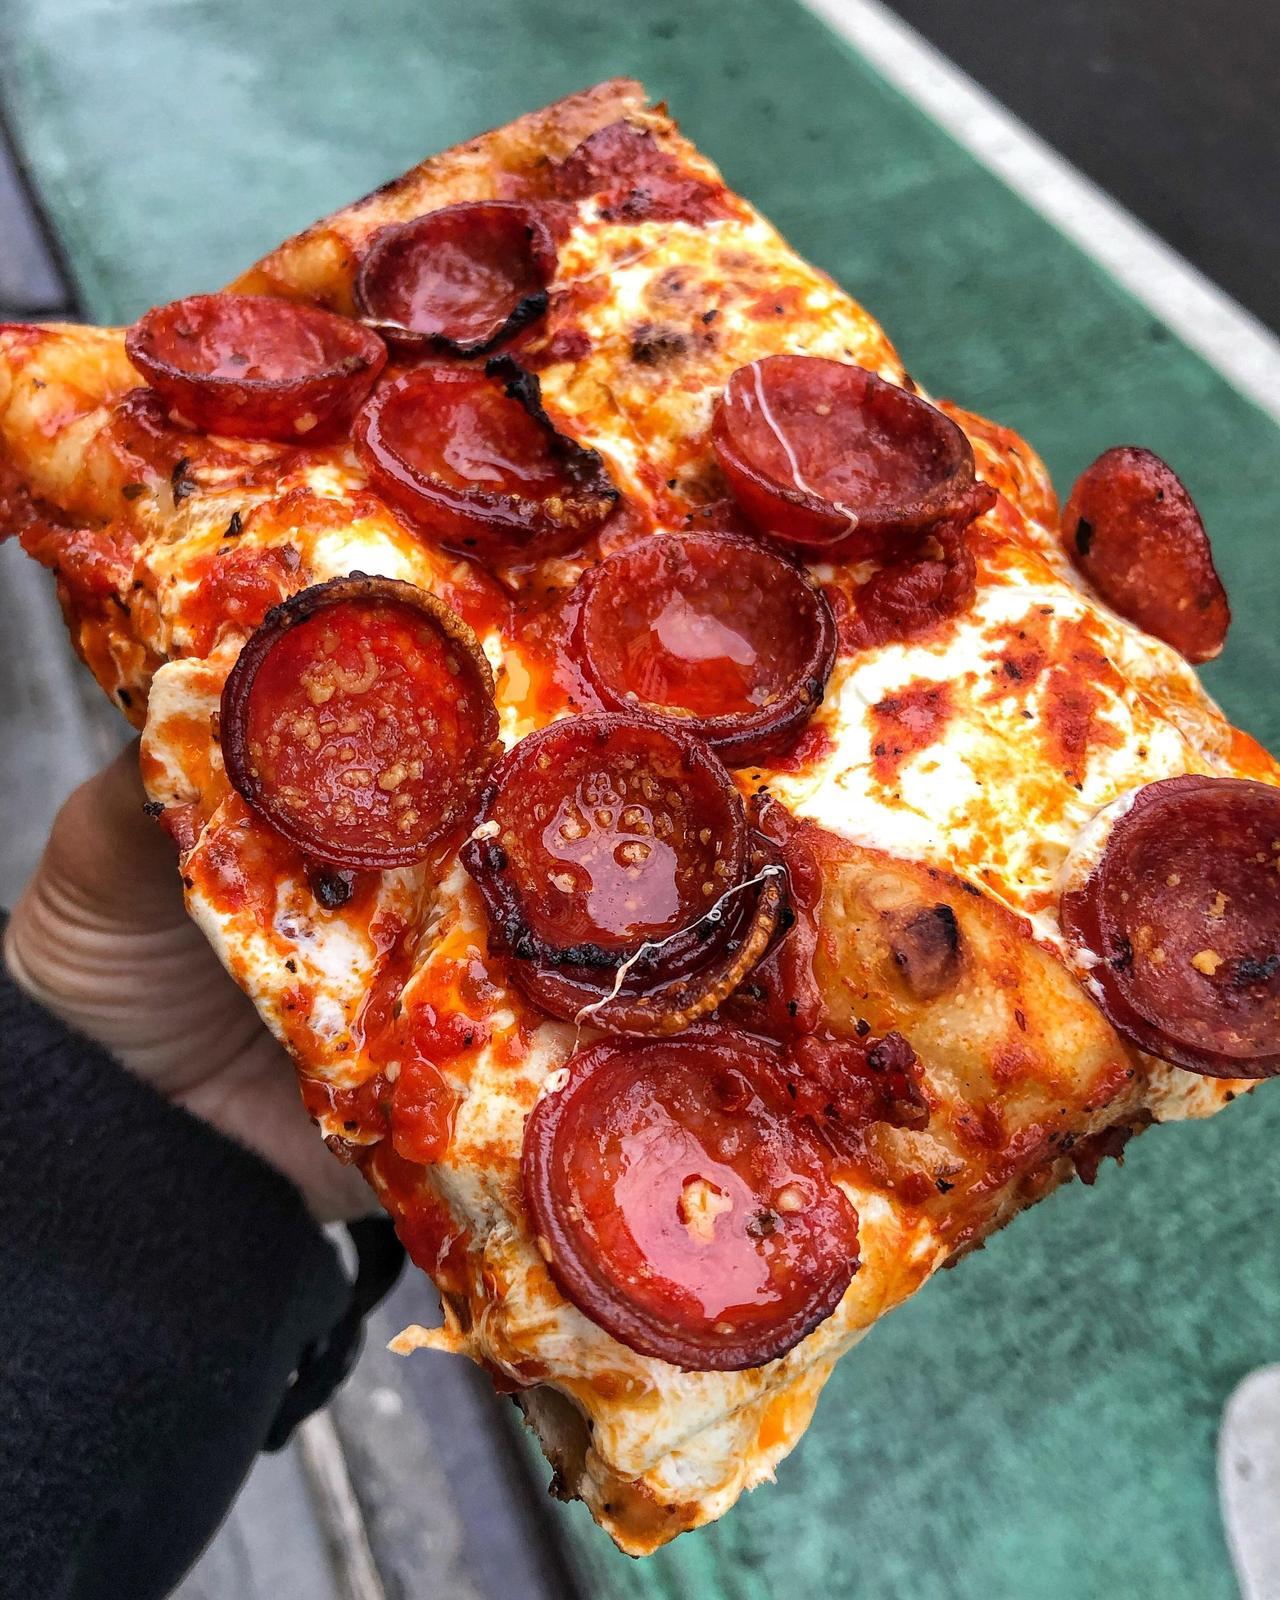 Pepperoni Pizza Porn - Food Porn Diary â€” Pepperoni pizza from Prince St. Pizza in NYC